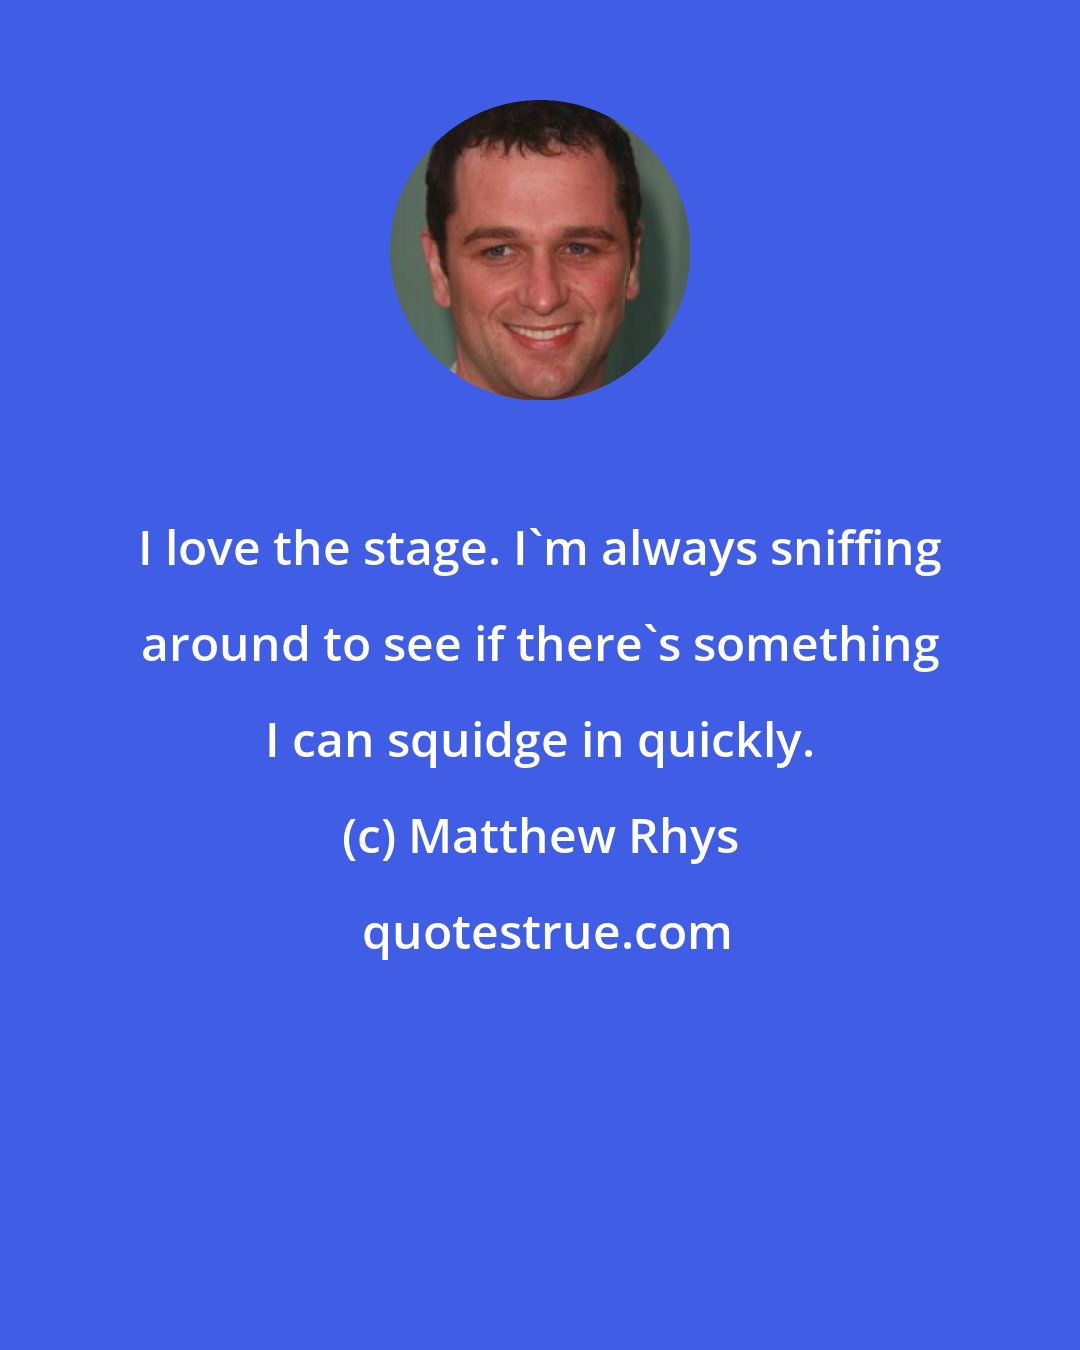 Matthew Rhys: I love the stage. I'm always sniffing around to see if there's something I can squidge in quickly.